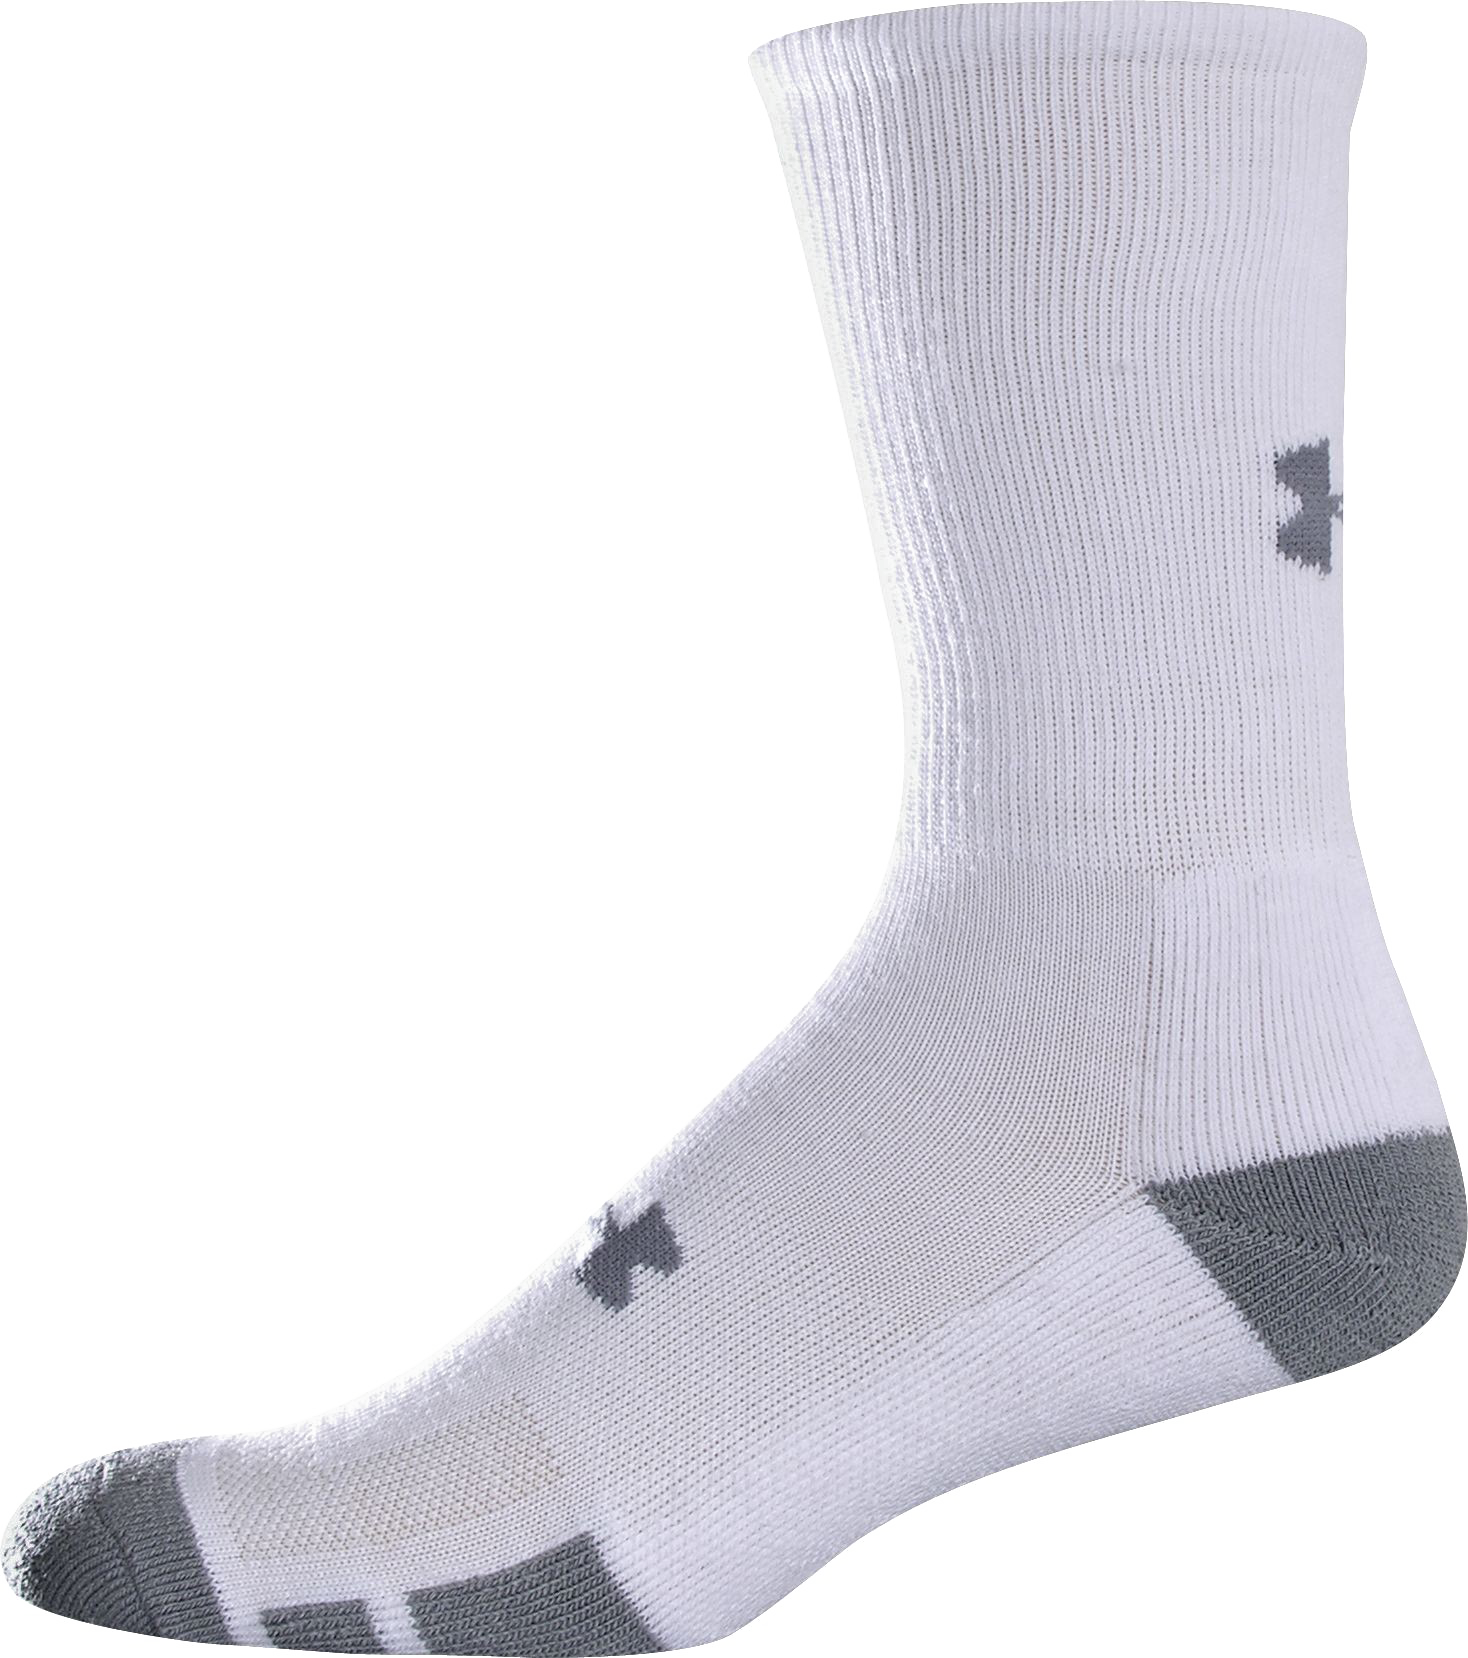 Download A White Sock With Grey Logo [100% Free] - FastPNG